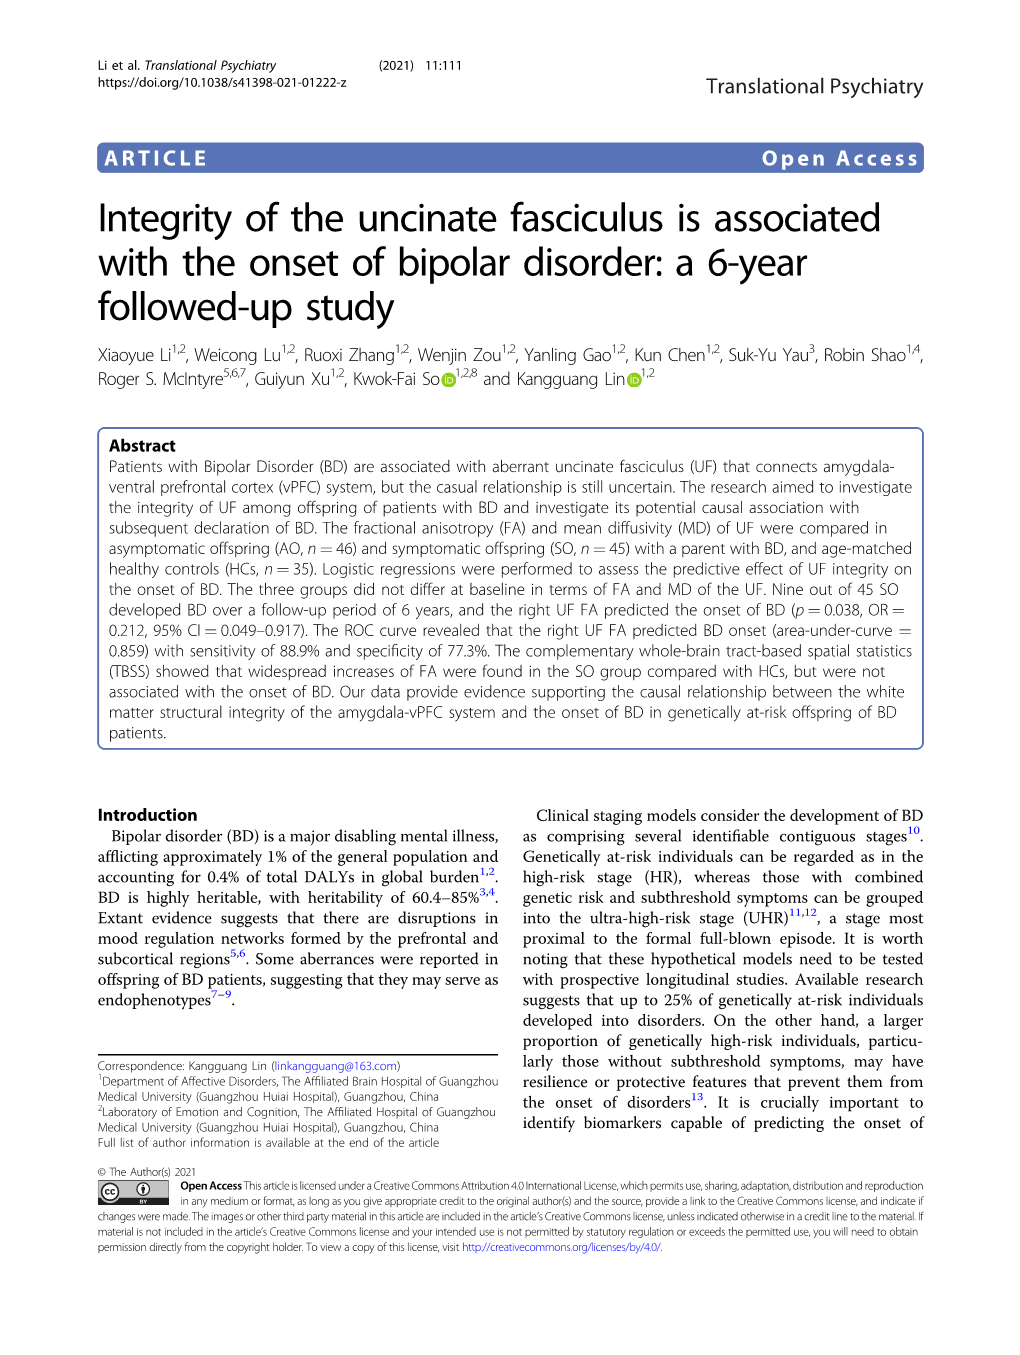 Integrity of the Uncinate Fasciculus Is Associated with the Onset